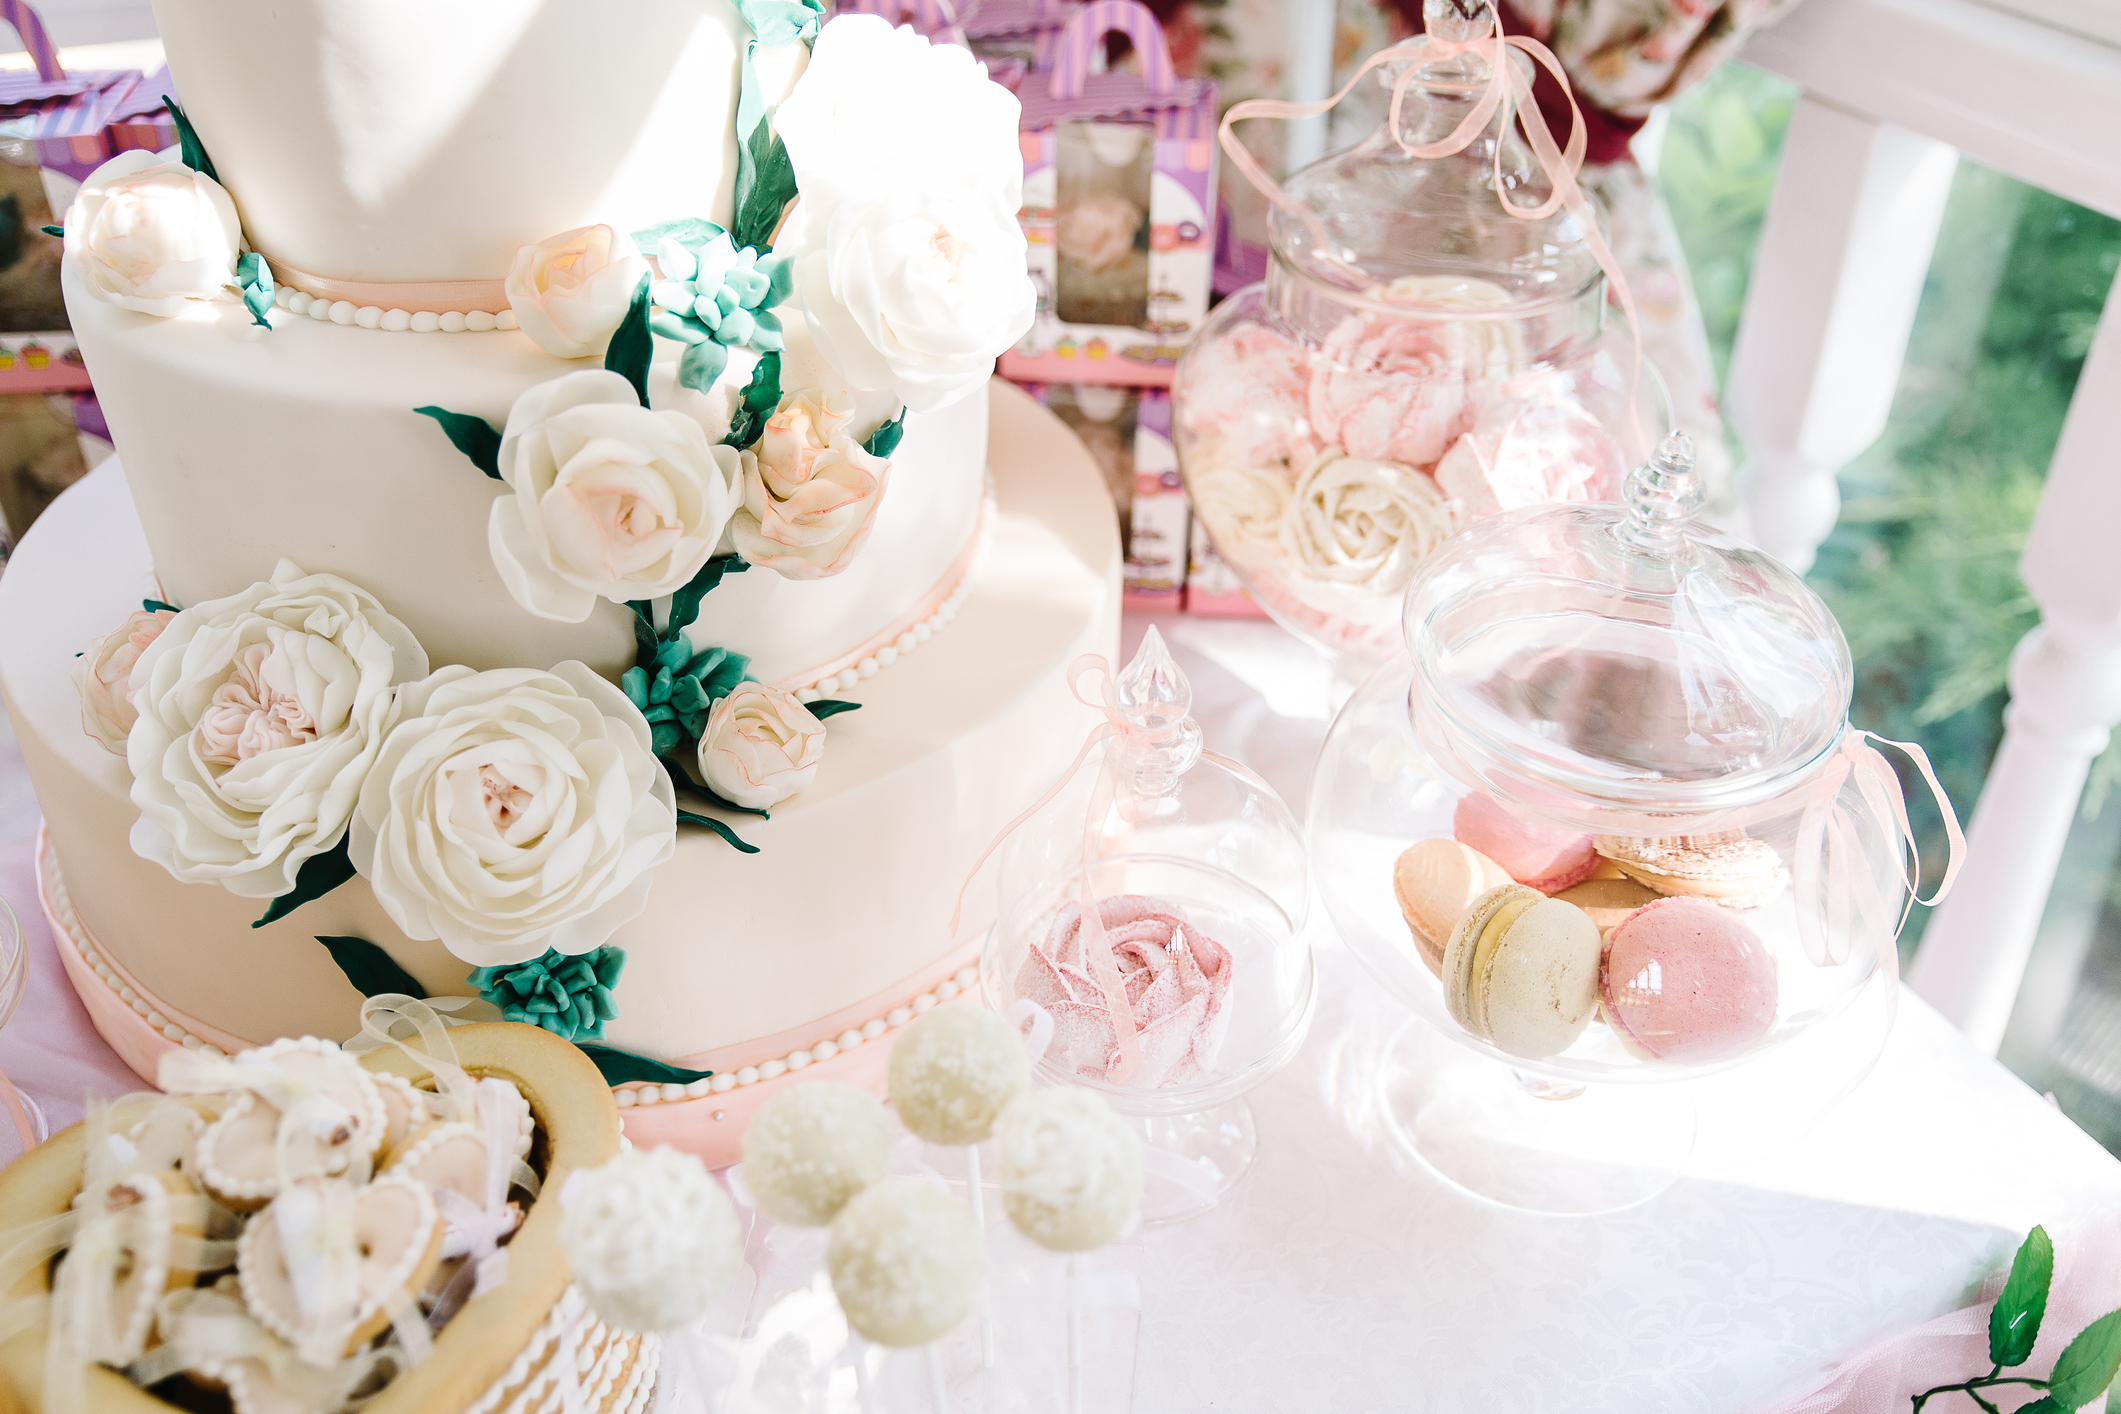 You can’t put your wedding cake planning on hold forever; get a jump start at the wedding showcase!